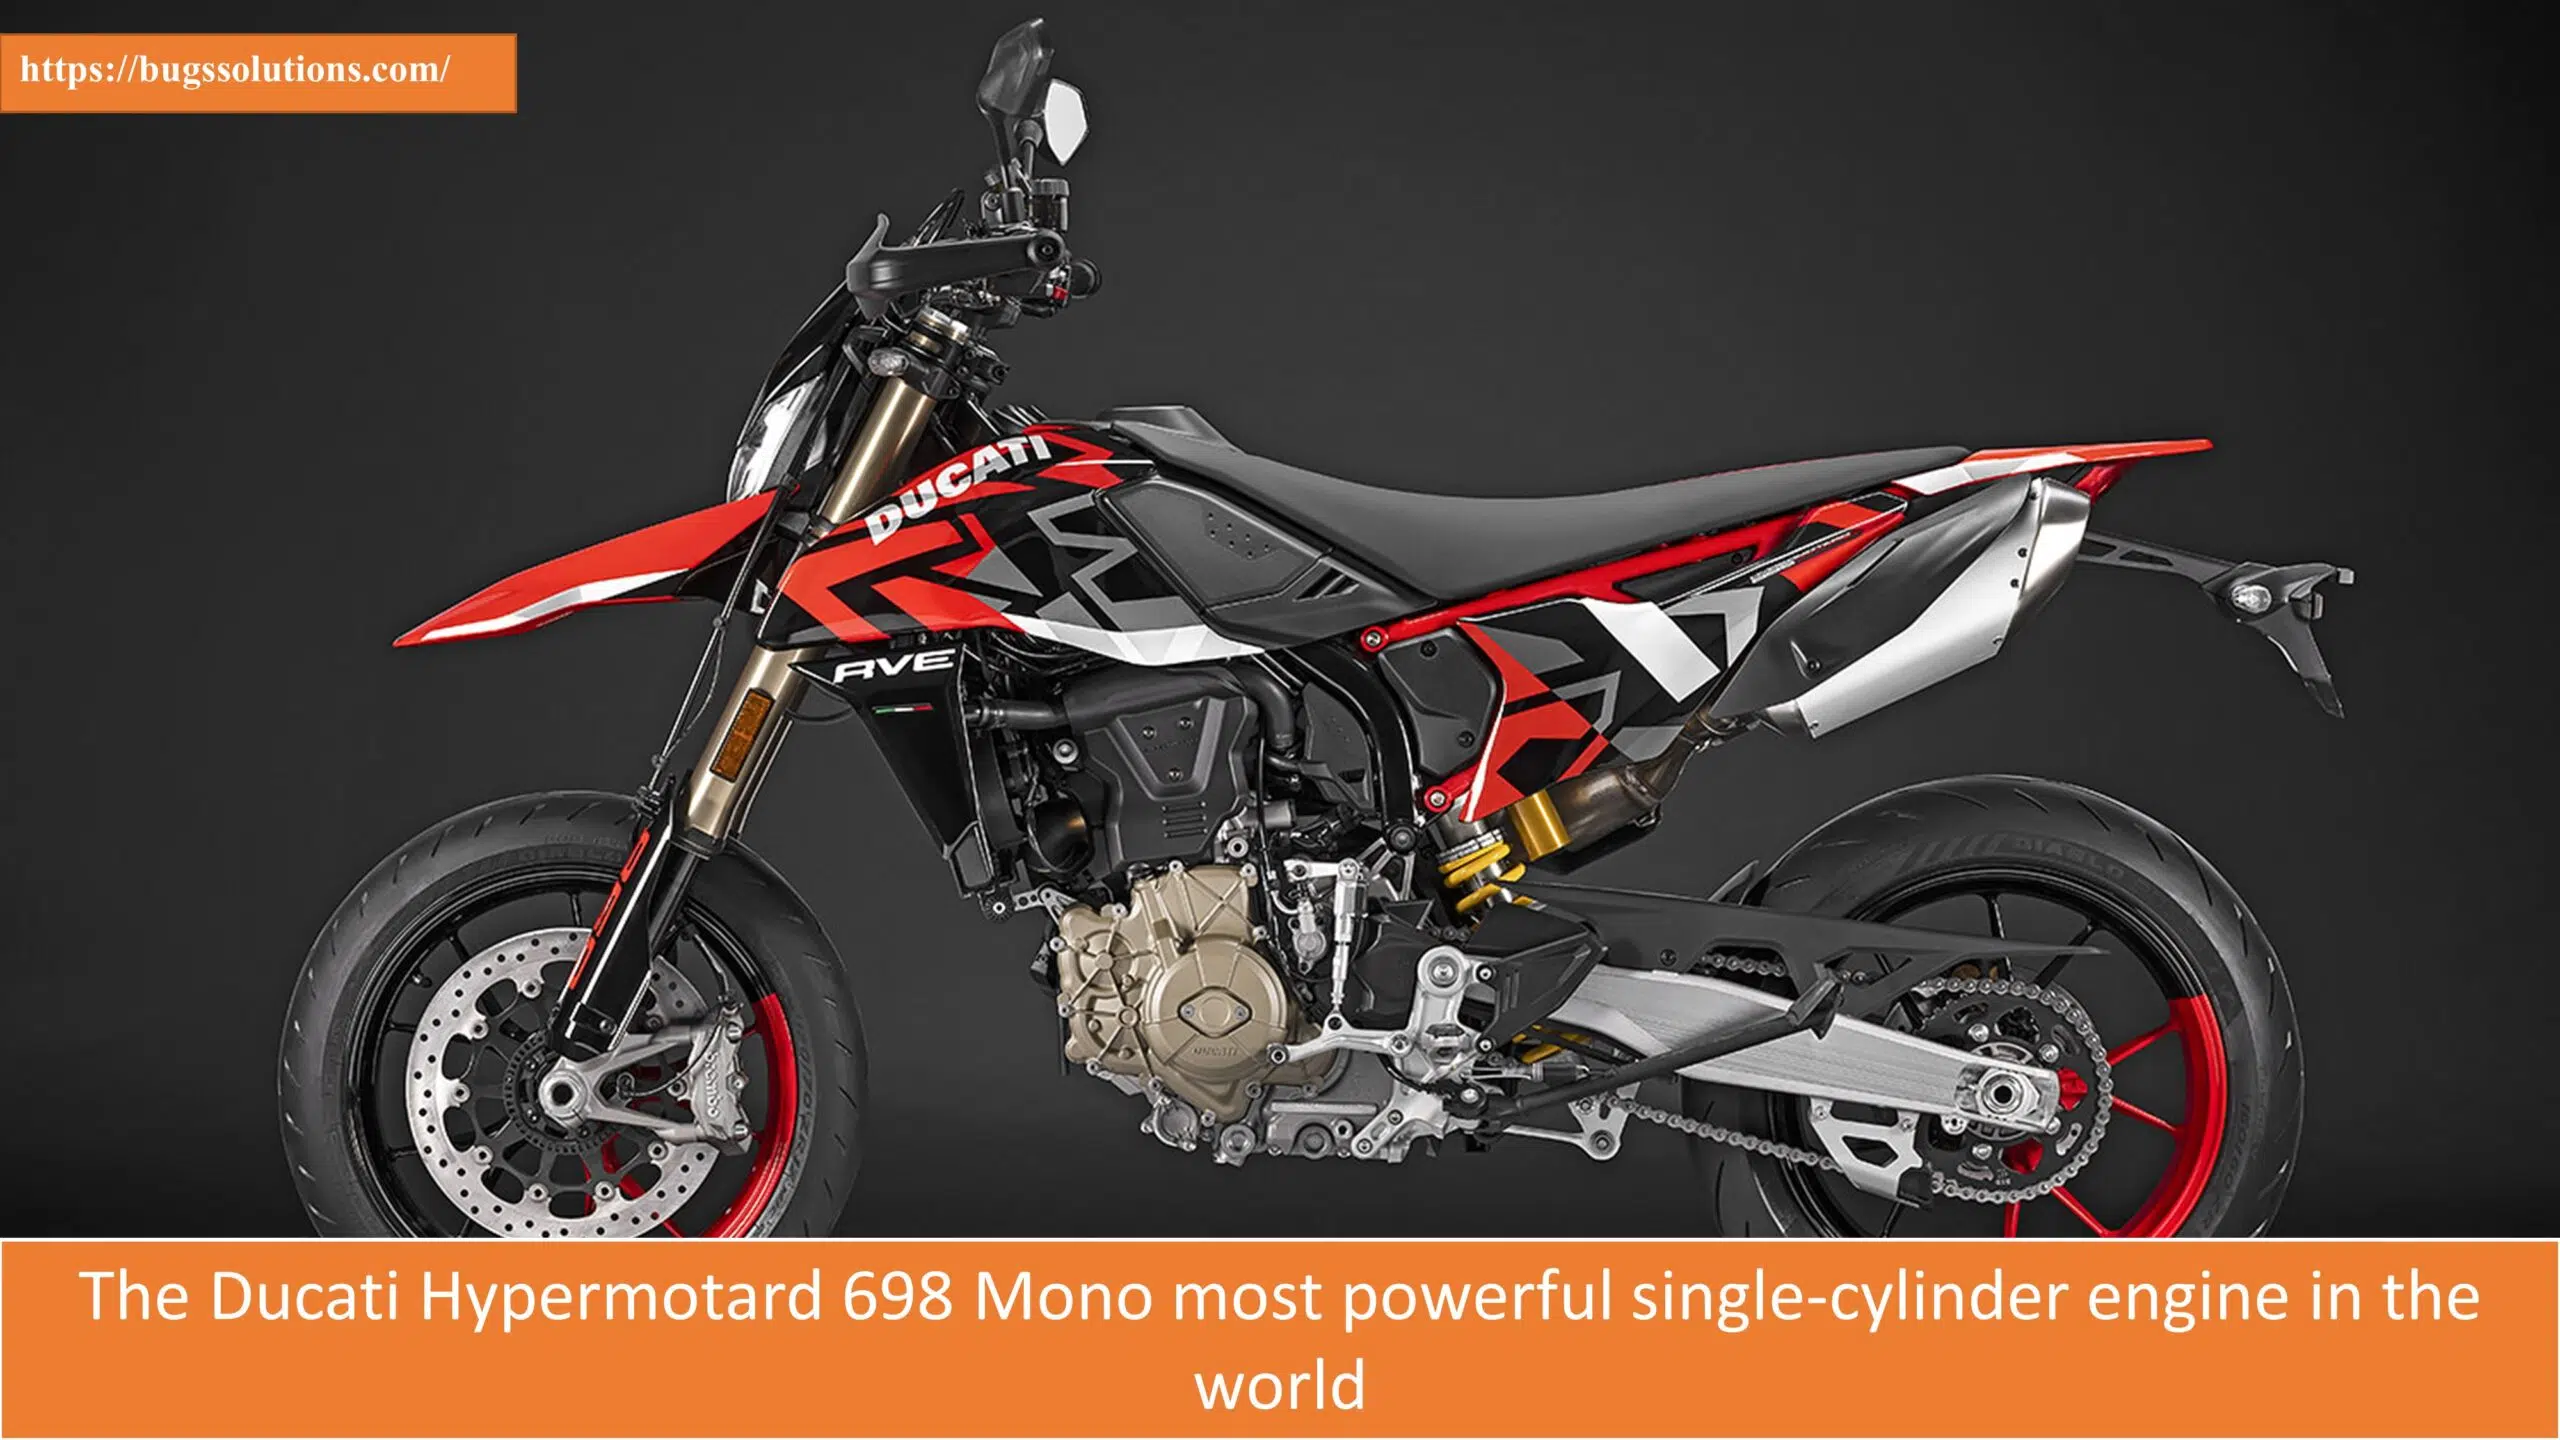 The Ducati Hypermotard 698 Mono most powerful single-cylinder engine in the world - Bugs Solutions